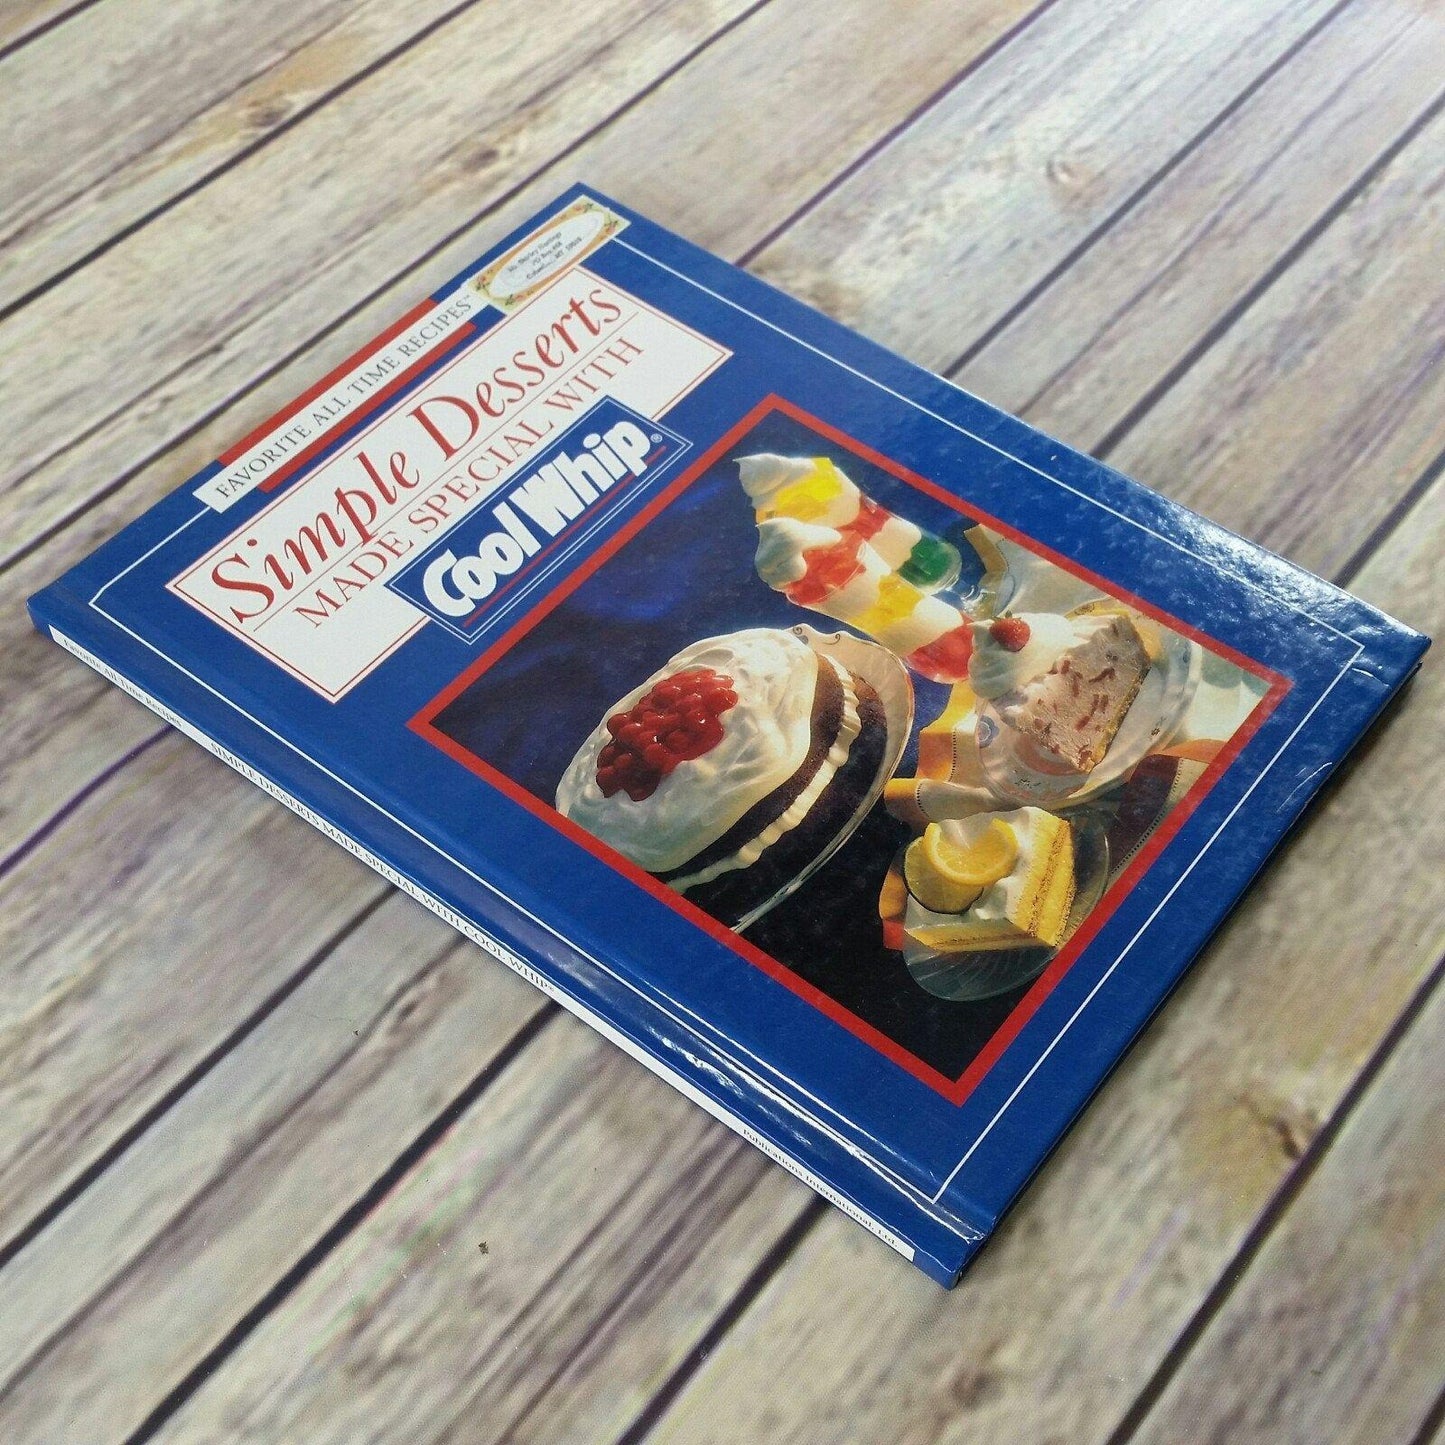 Vintage Cookbook Cool Whip Simple Desserts Recipes 1994 Hardcover Promo Book Favorite All Time Recipes